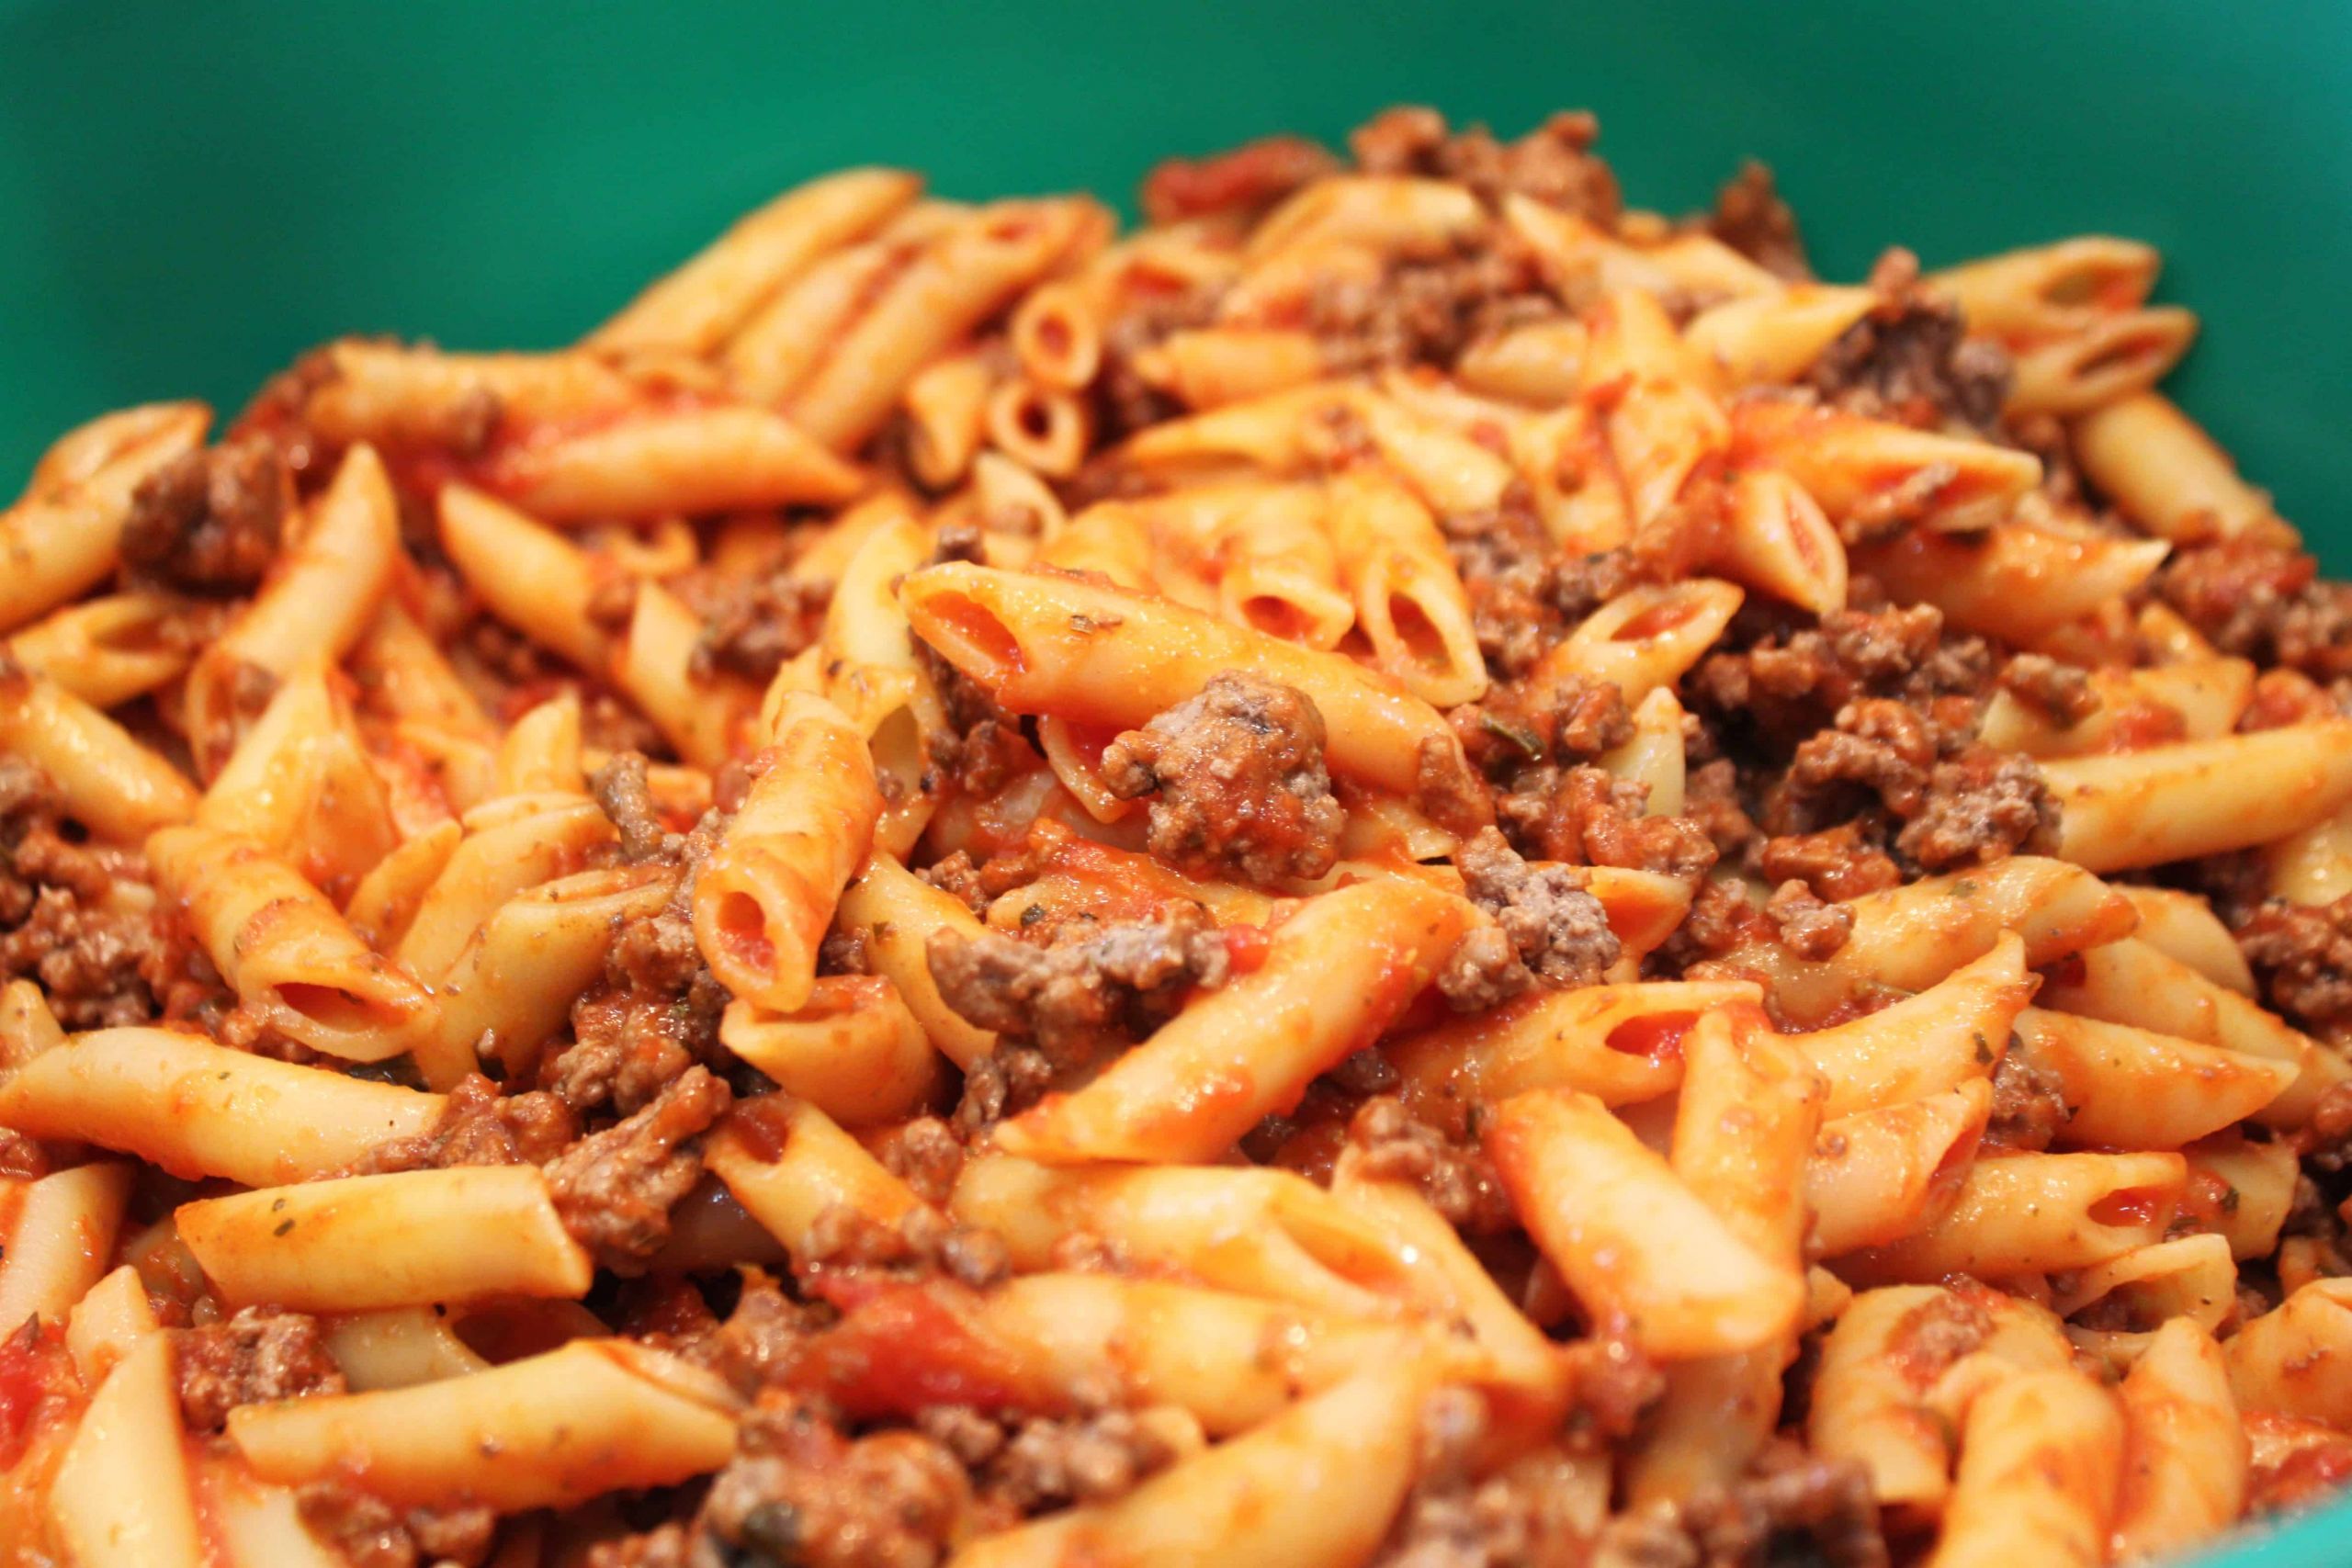 Penne Pasta Recipes with Ground Beef Awesome Penne Pasta with Ground Beef for Baked Ziti Recipe